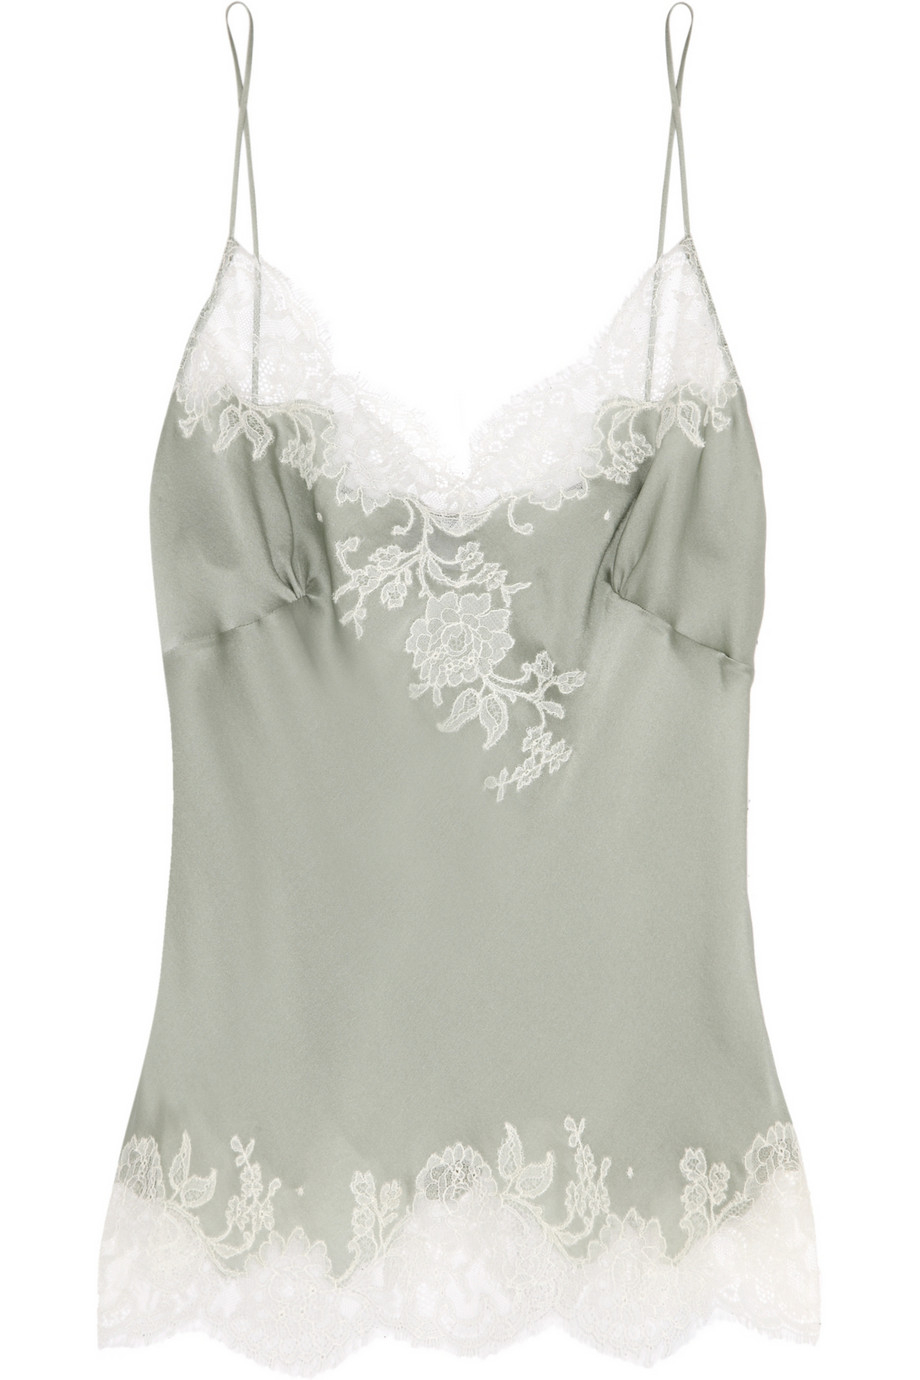 Lyst - Carine Gilson Lace trimmed Silk satin Camisole in Green